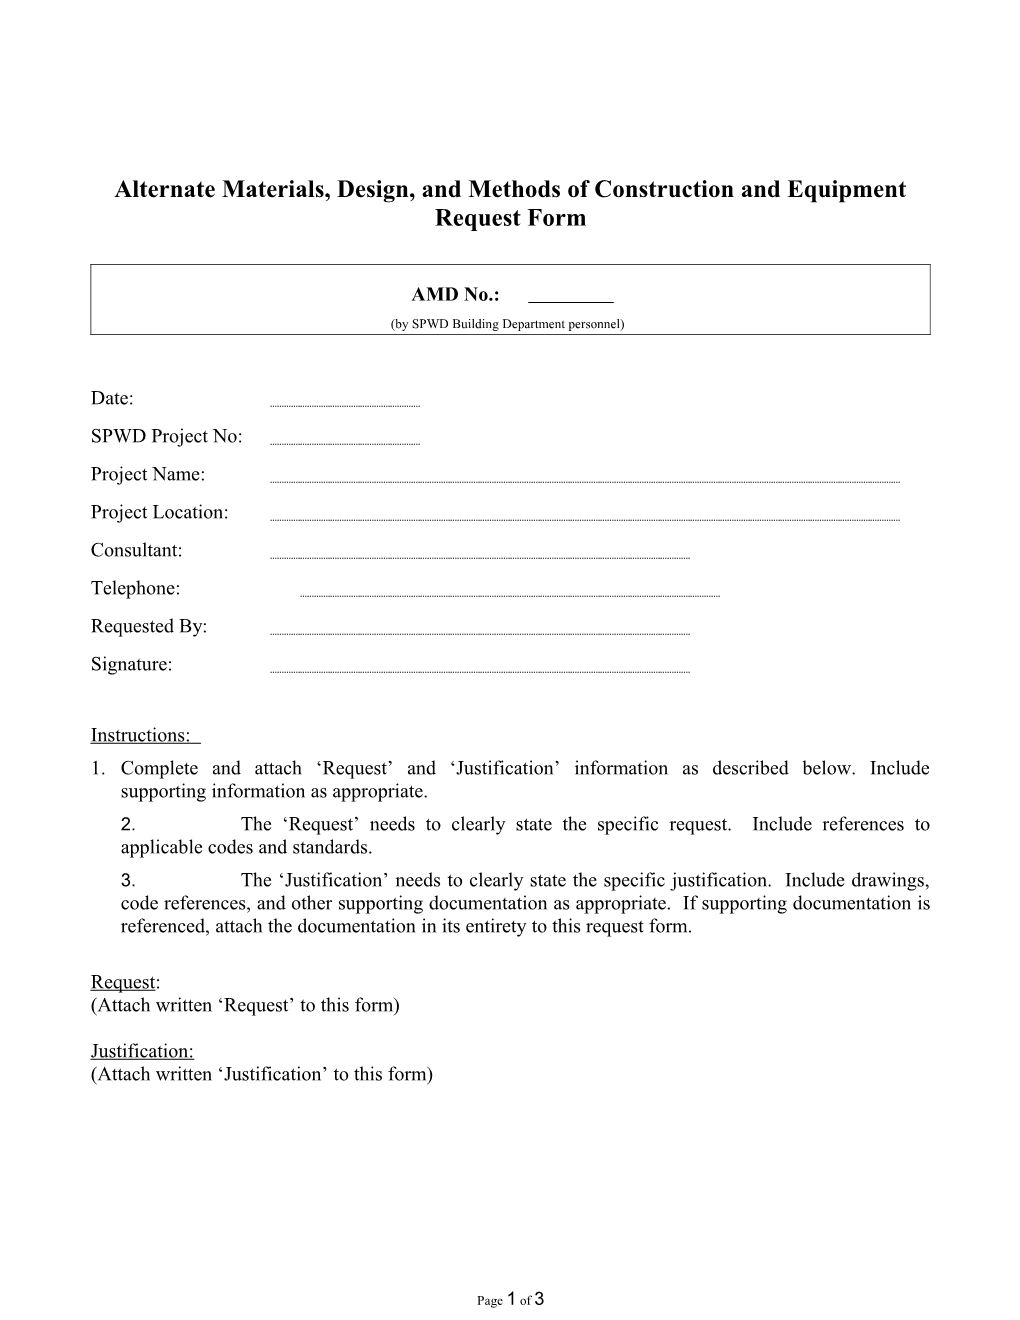 Alternate Materials, Design, and Methods of Construction and Equipment Request Form